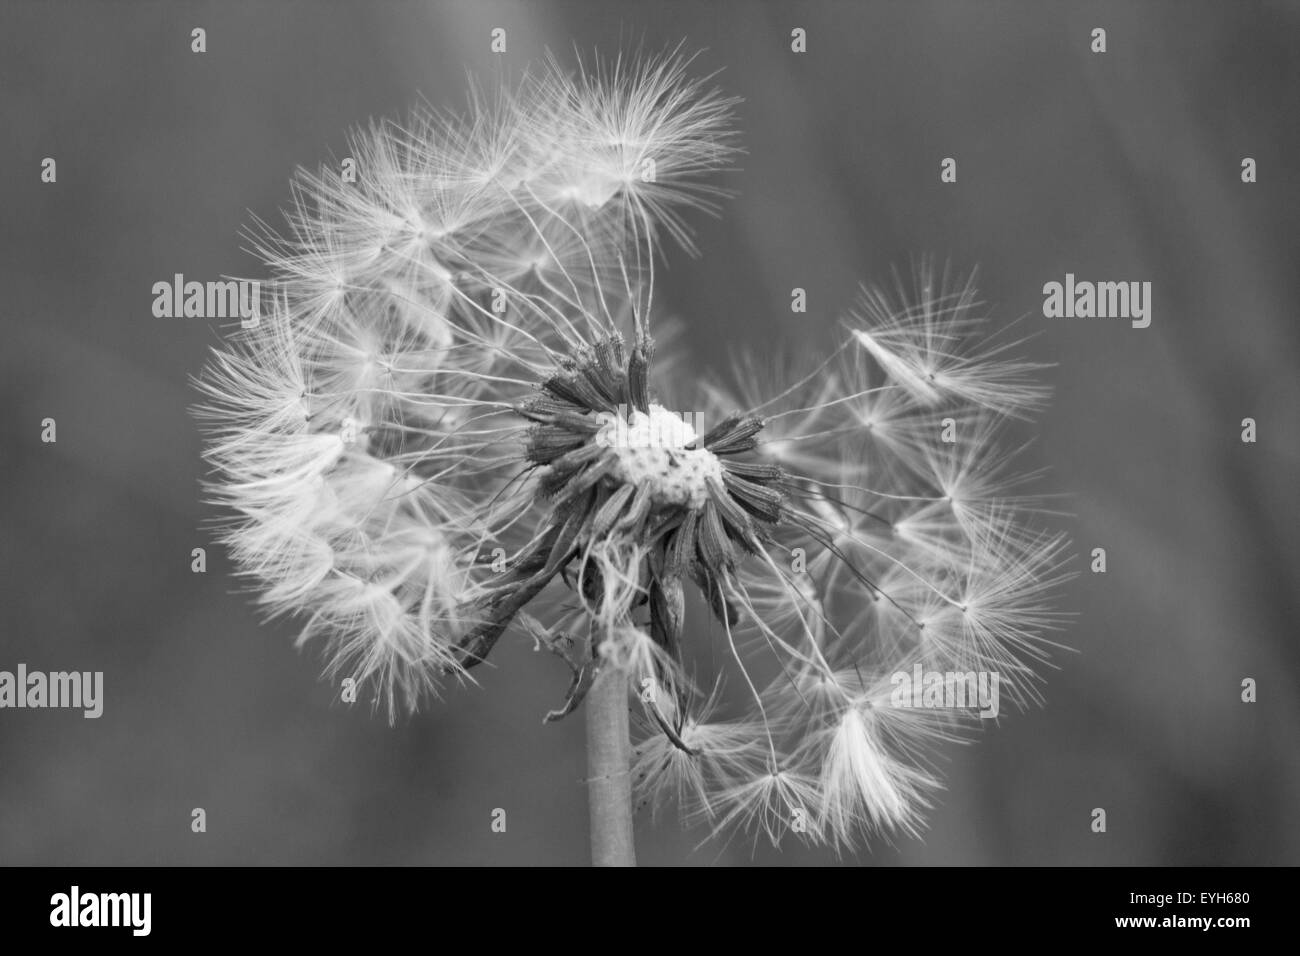 Dandelion seeds just ready to blow away in the wind. Stock Photo